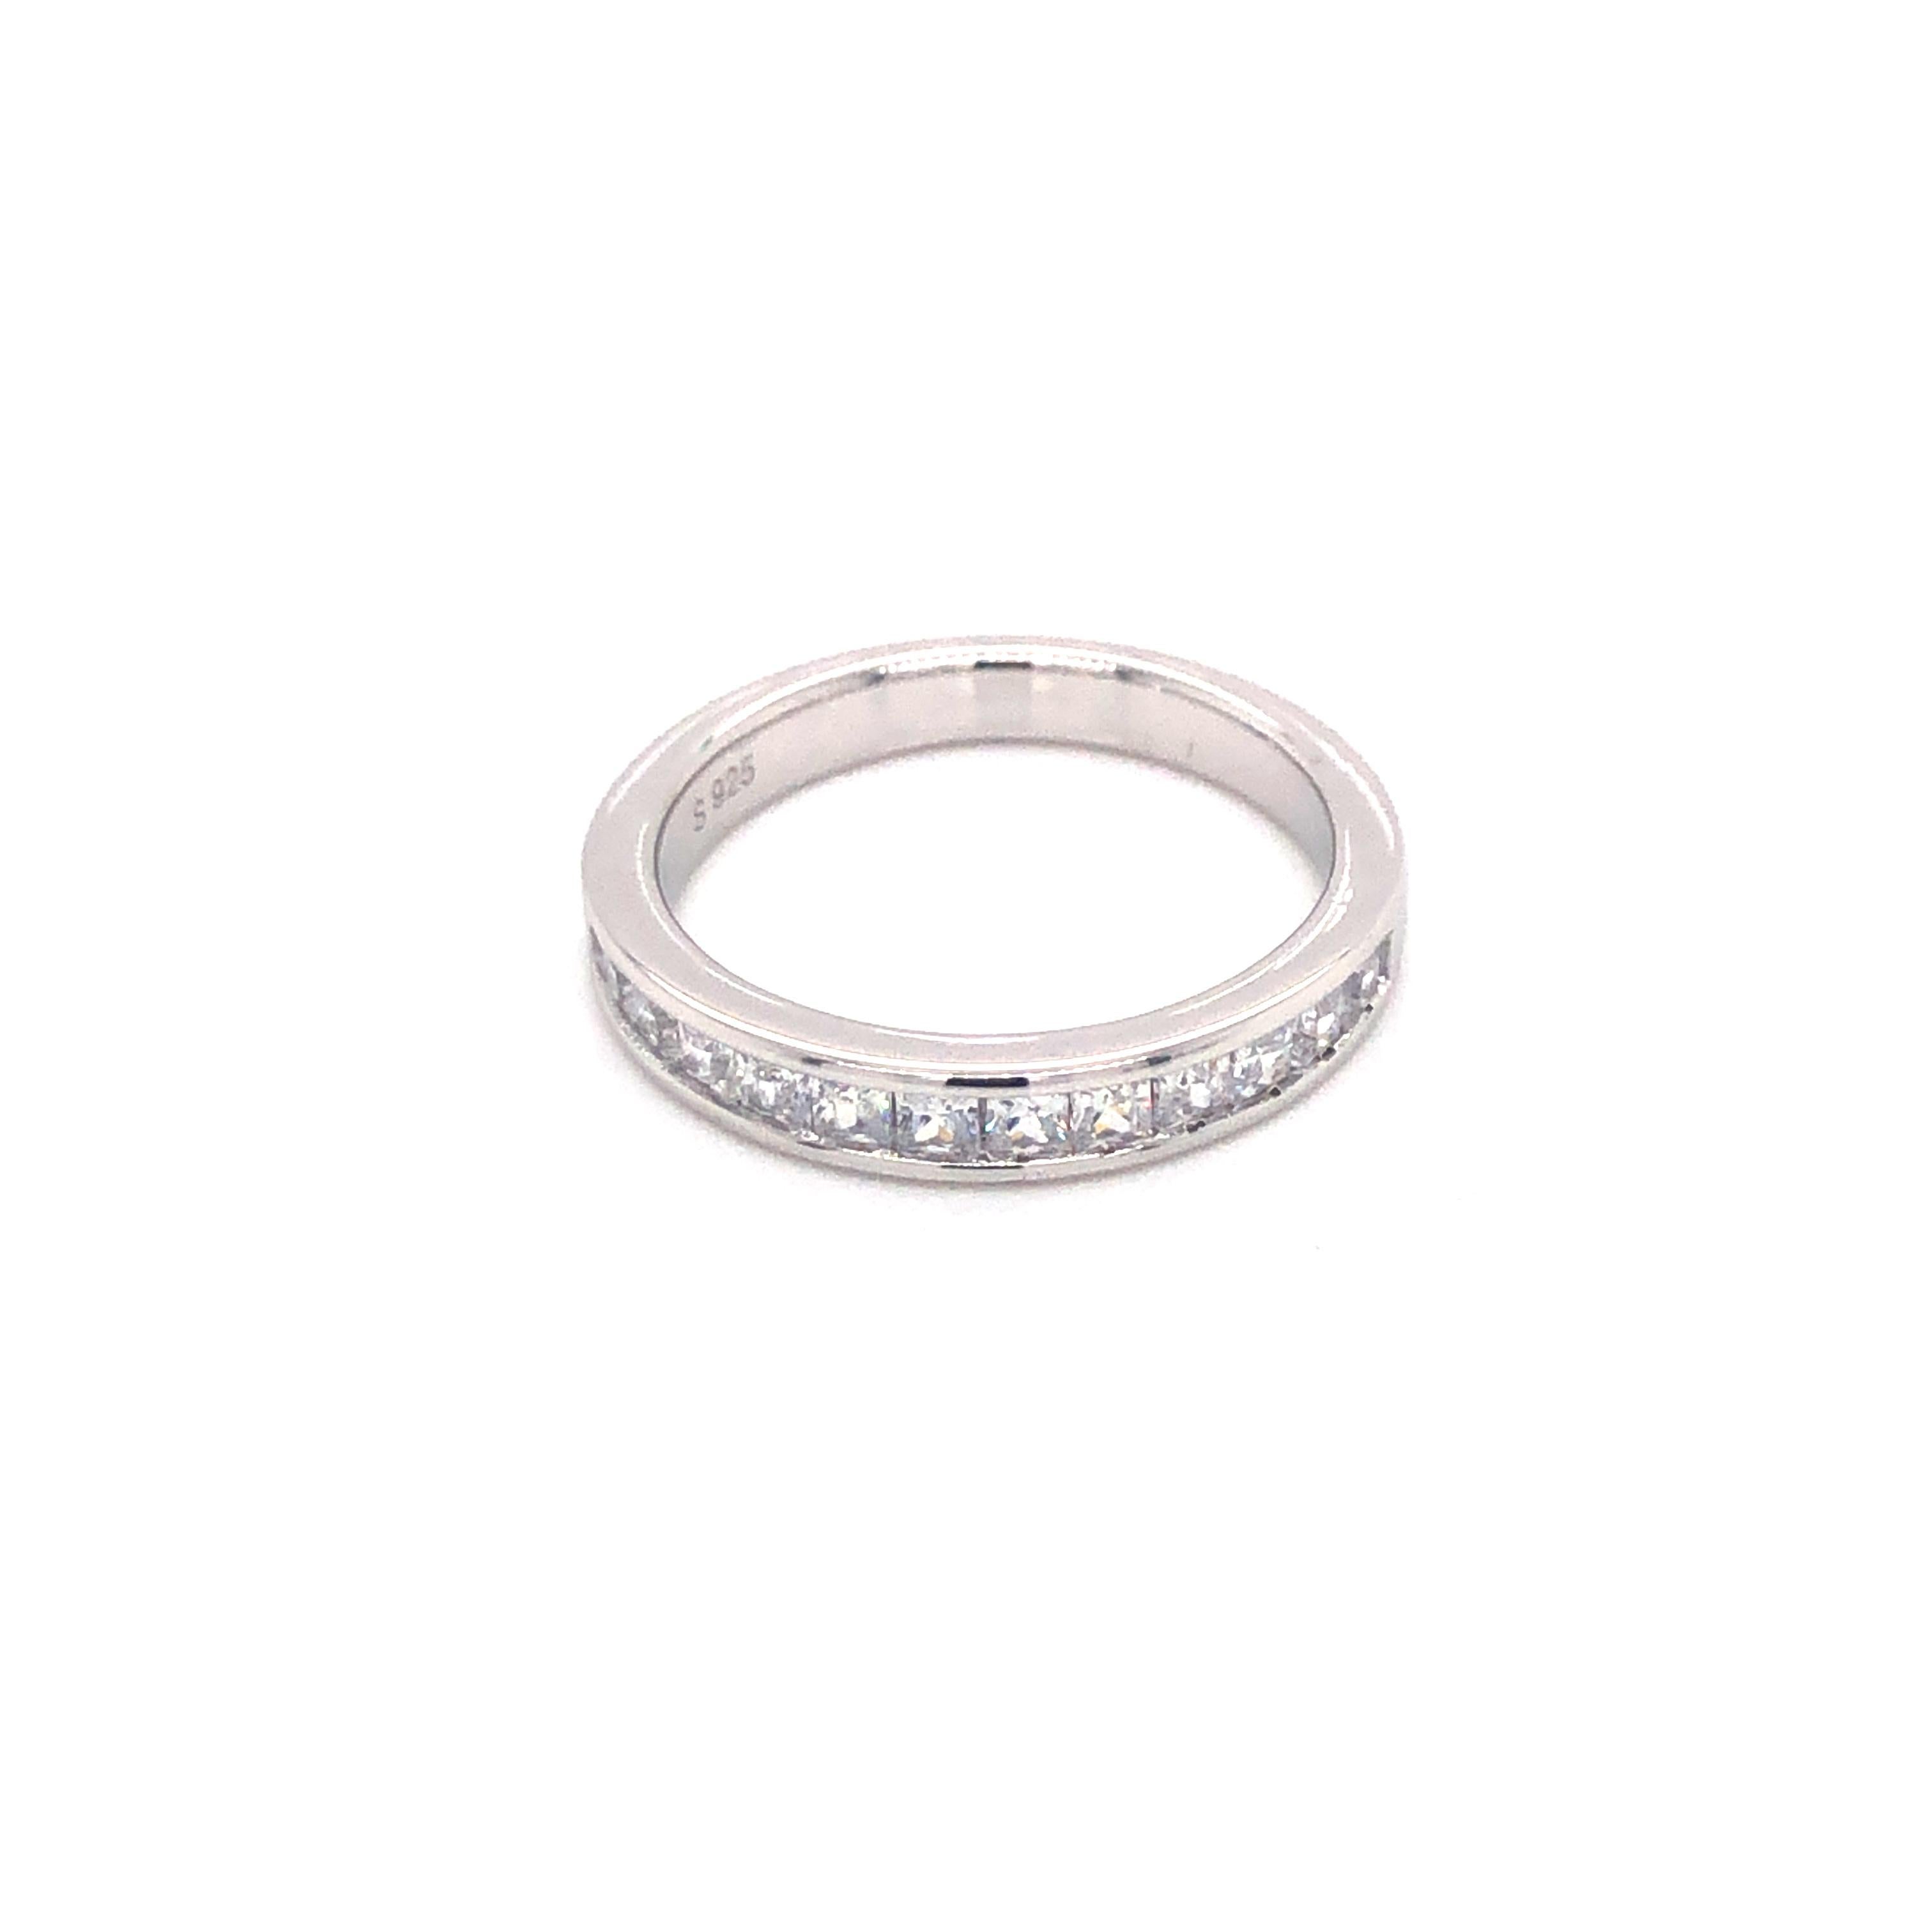 This versatile channel set princess cut band ring can be worn alone or complement any solitaire. The stunning simplicity of this design will take you effortlessly from desk to dinner. 

Featuring 12.50ct princess cuts, set into a half eternity band,